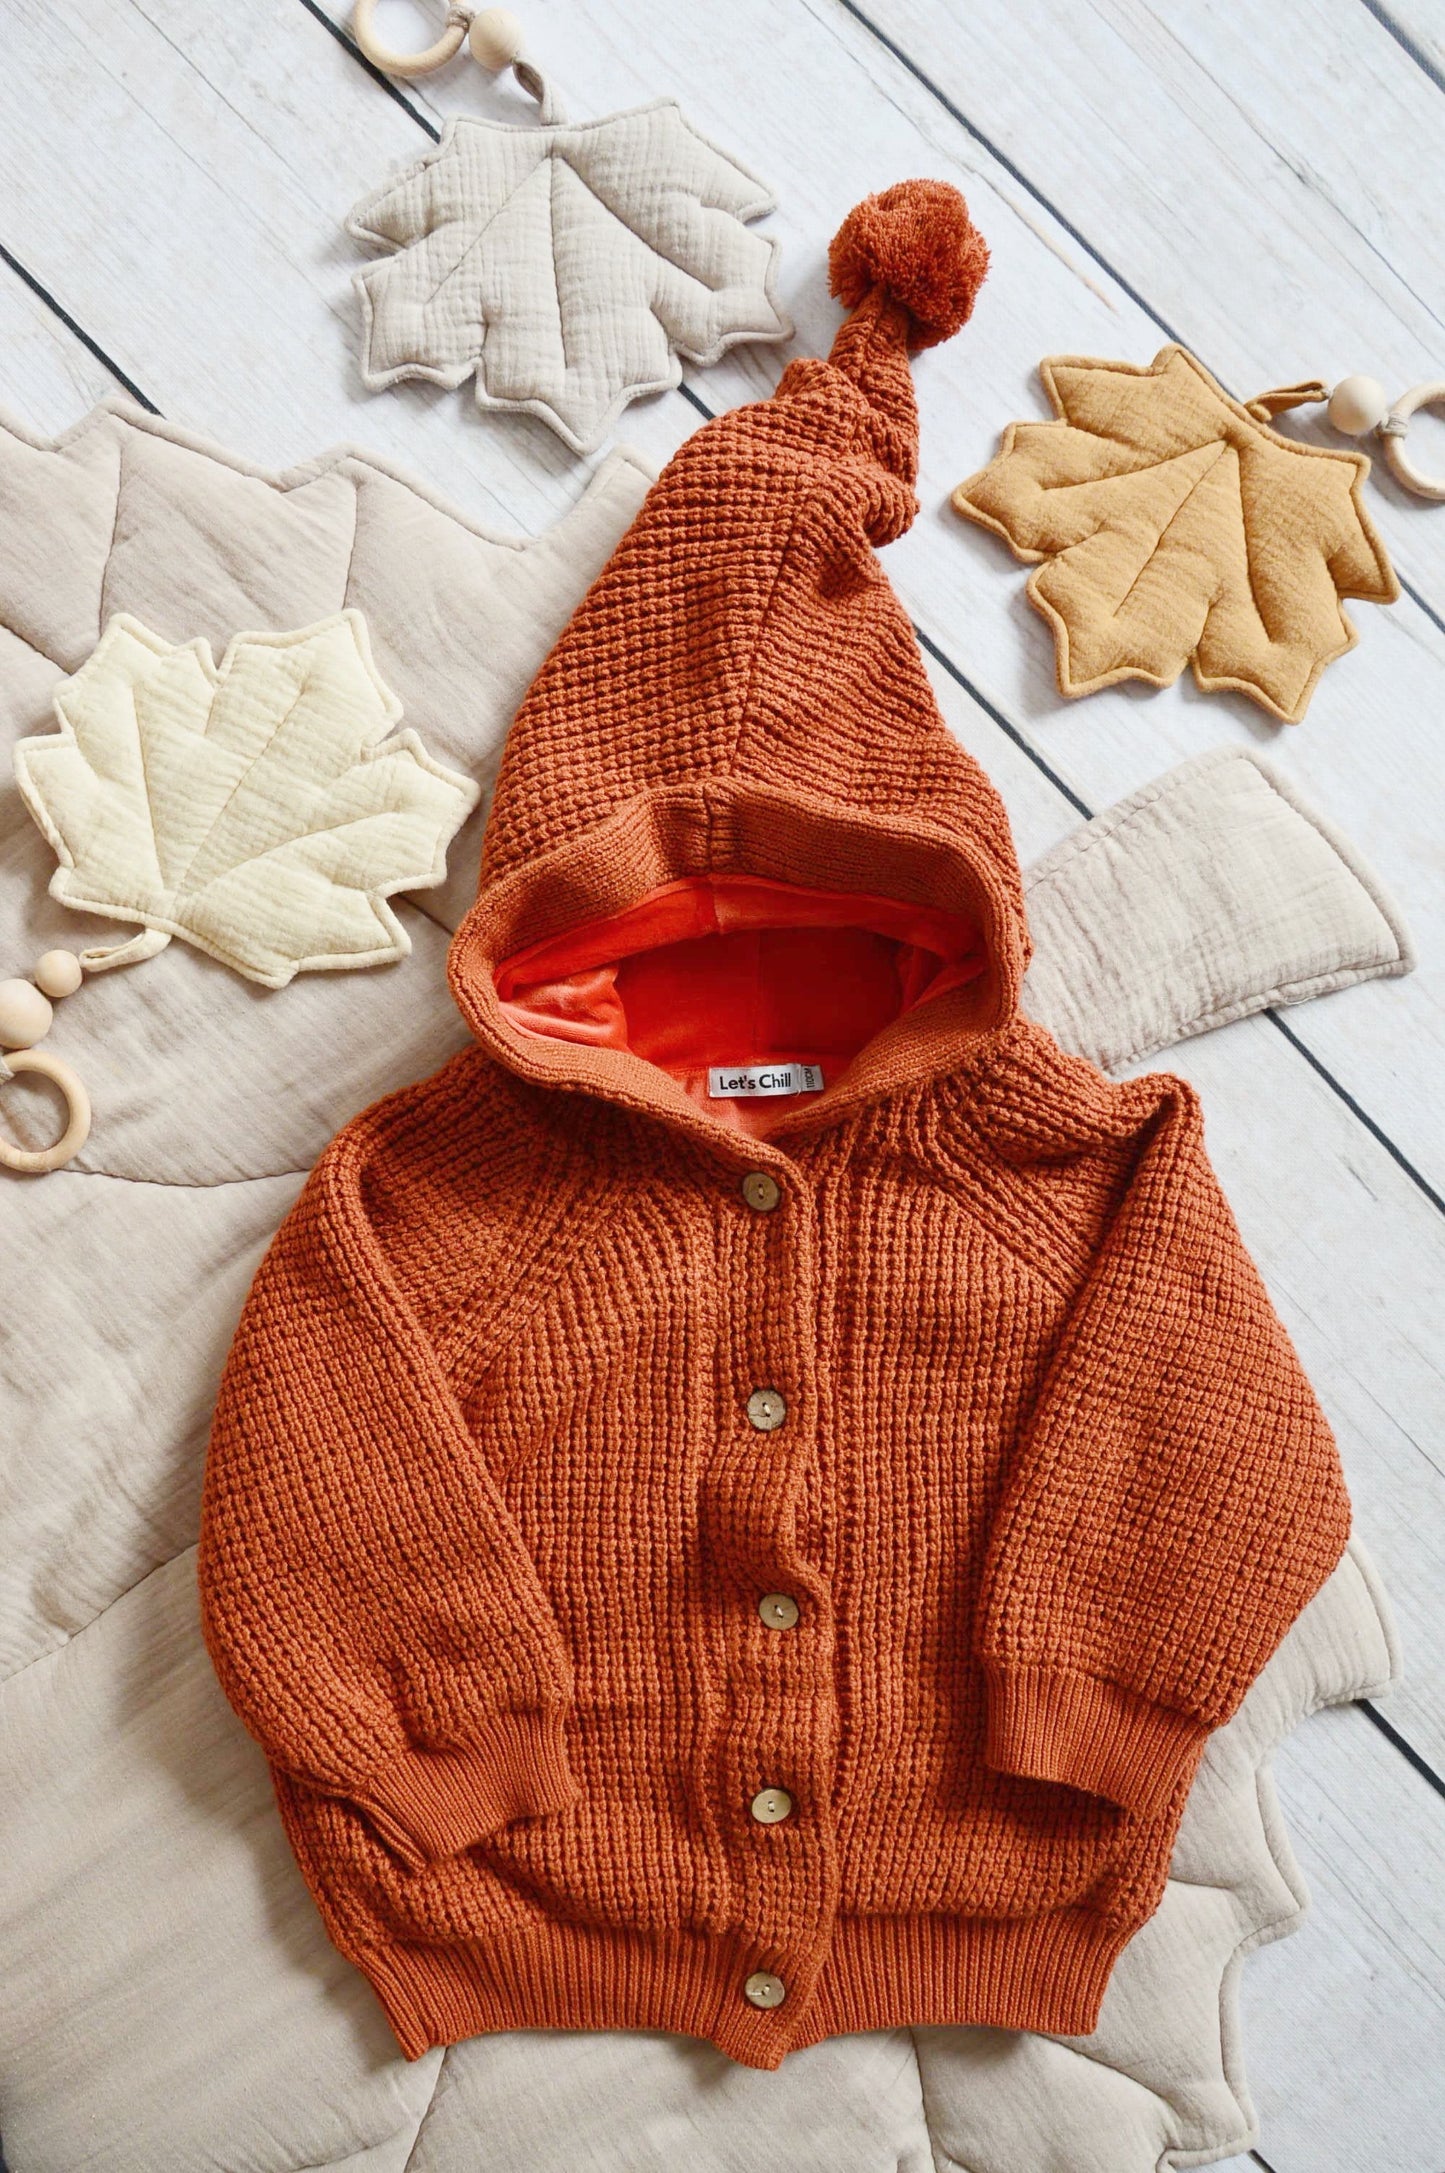 100% Cotton Fleece Lined Pixie Knitted Sweater